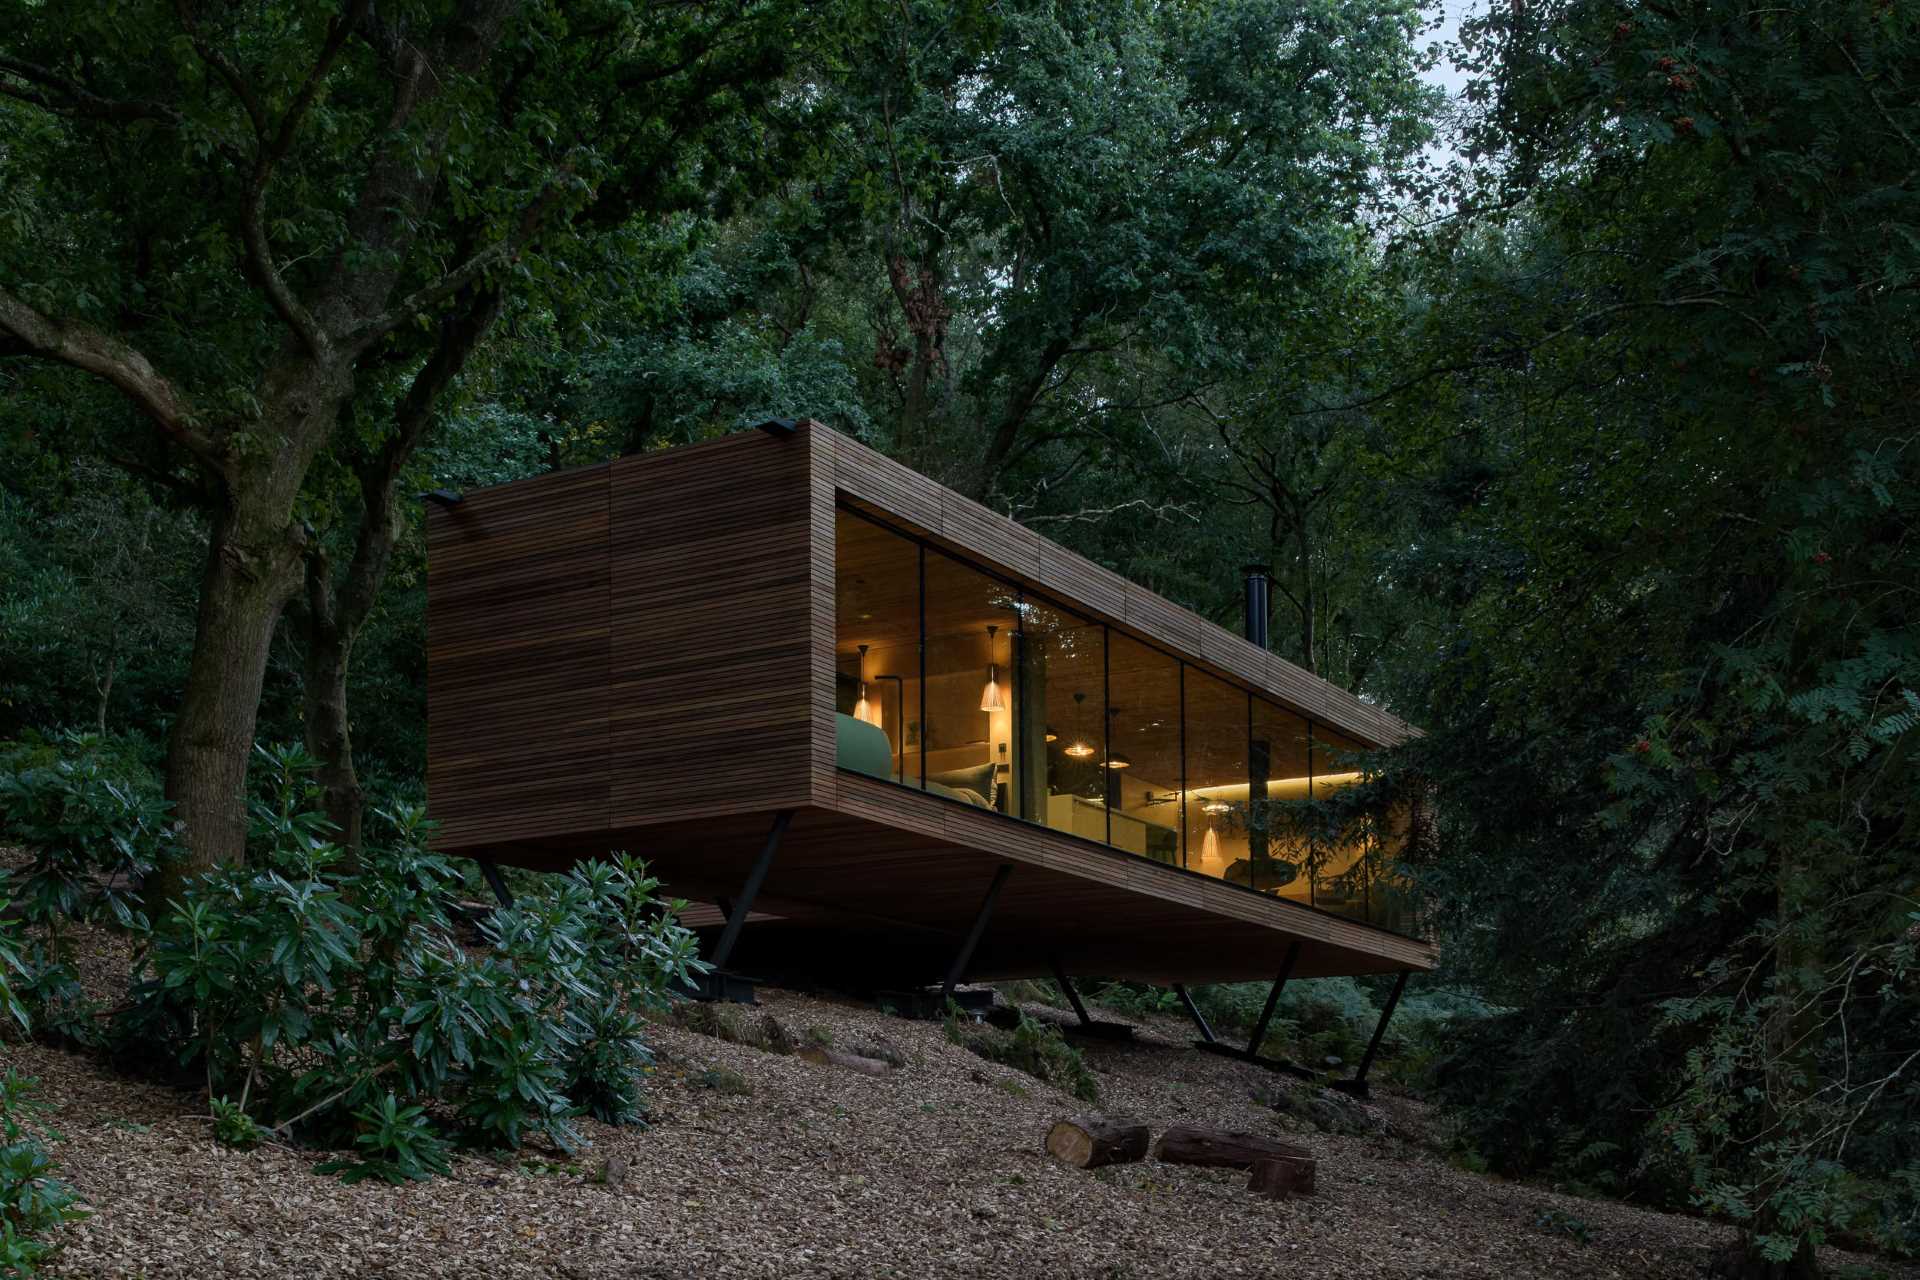 A wood clad home nestled between the trees.